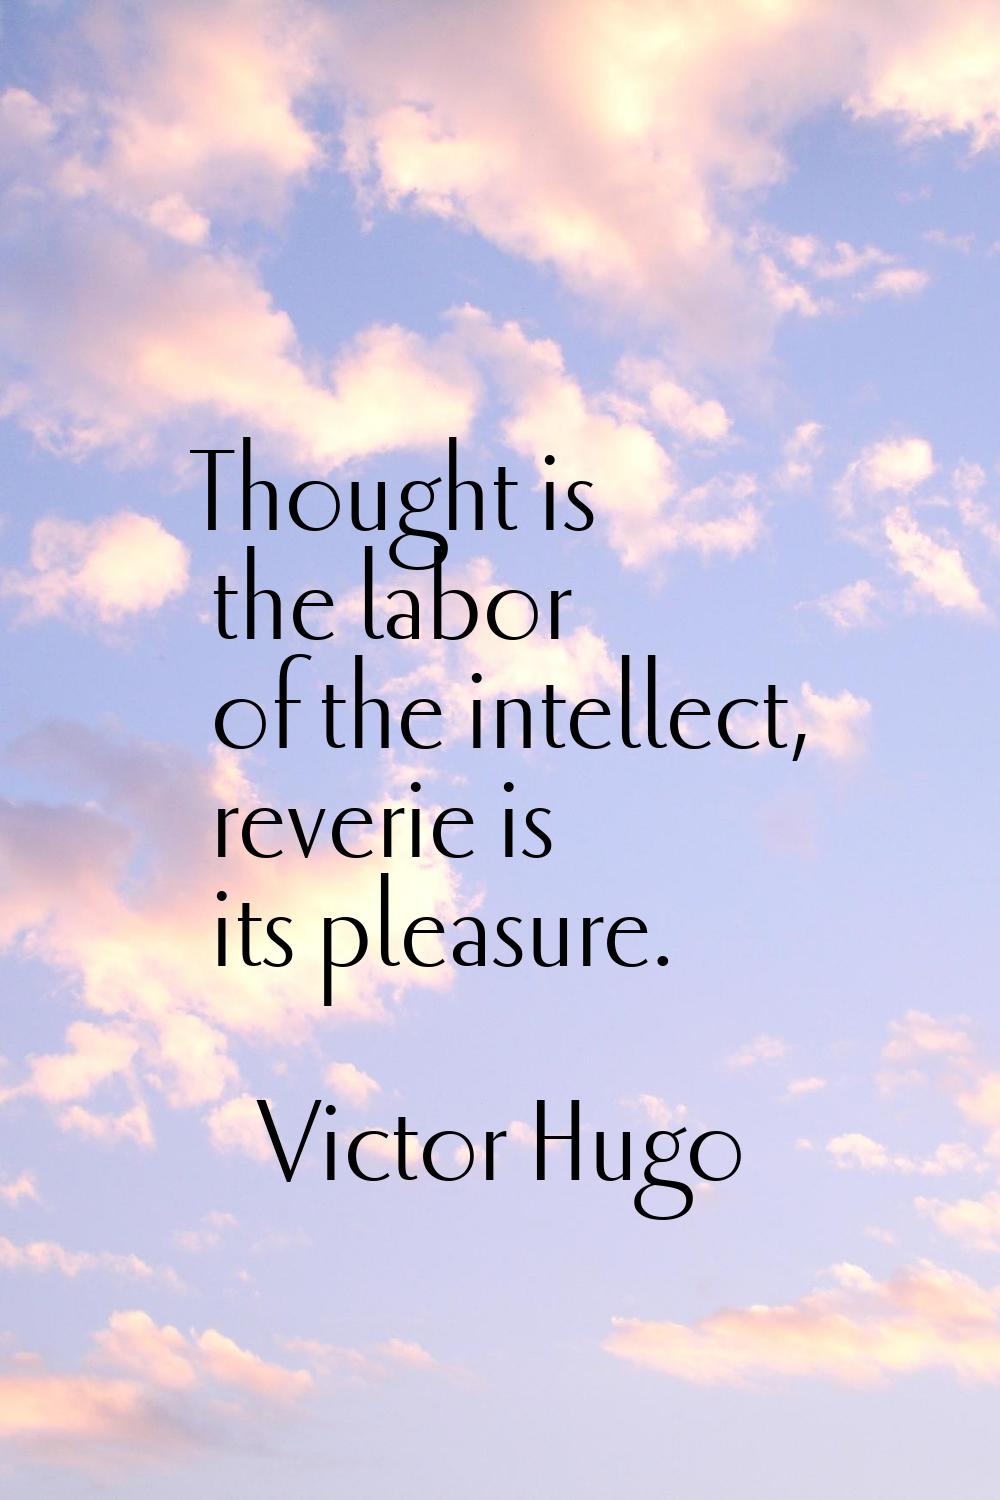 Thought is the labor of the intellect, reverie is its pleasure.